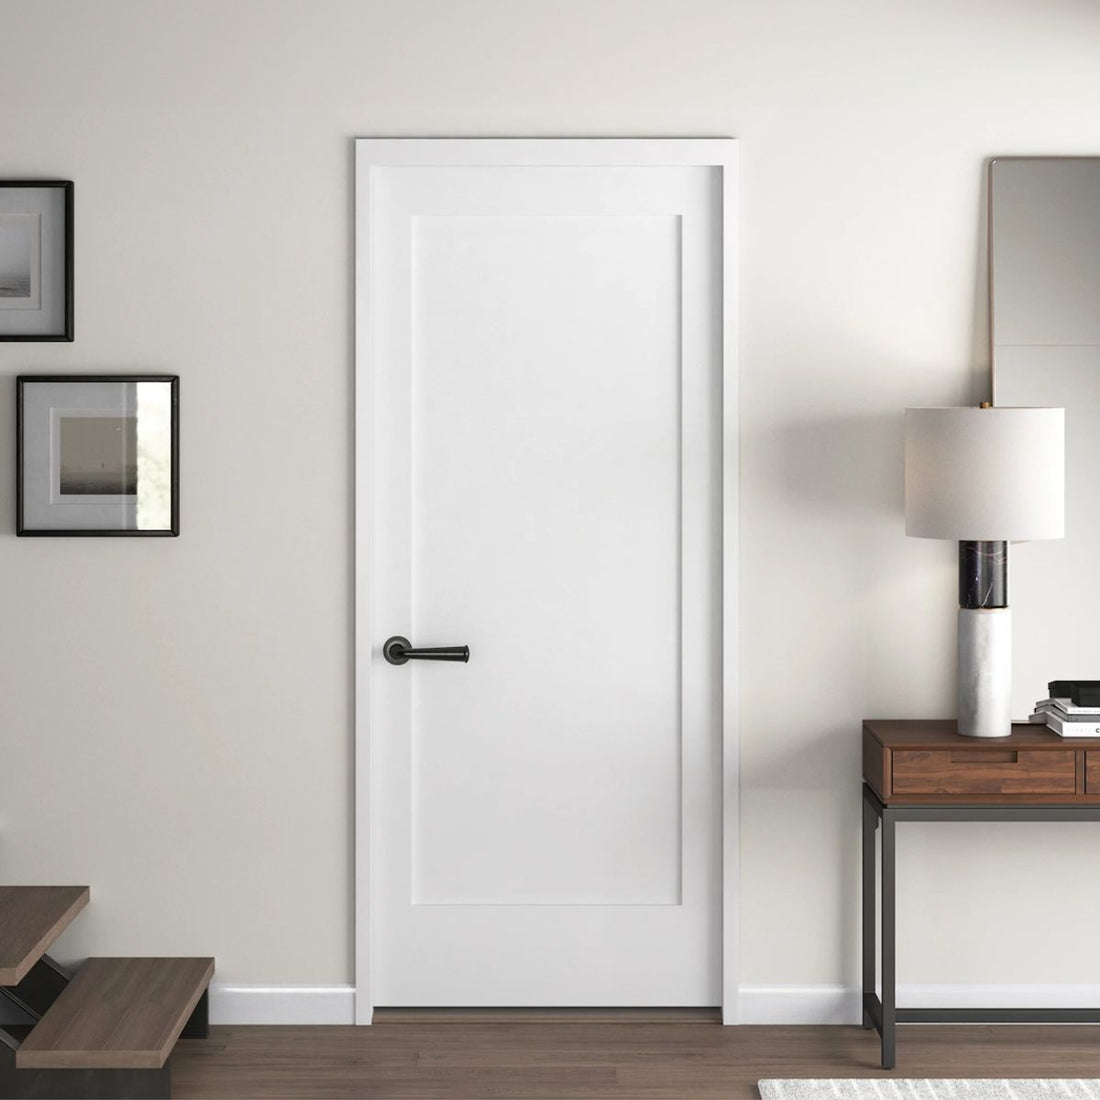 What’s the Difference? A Close Look at 5 Types of Interior Doors